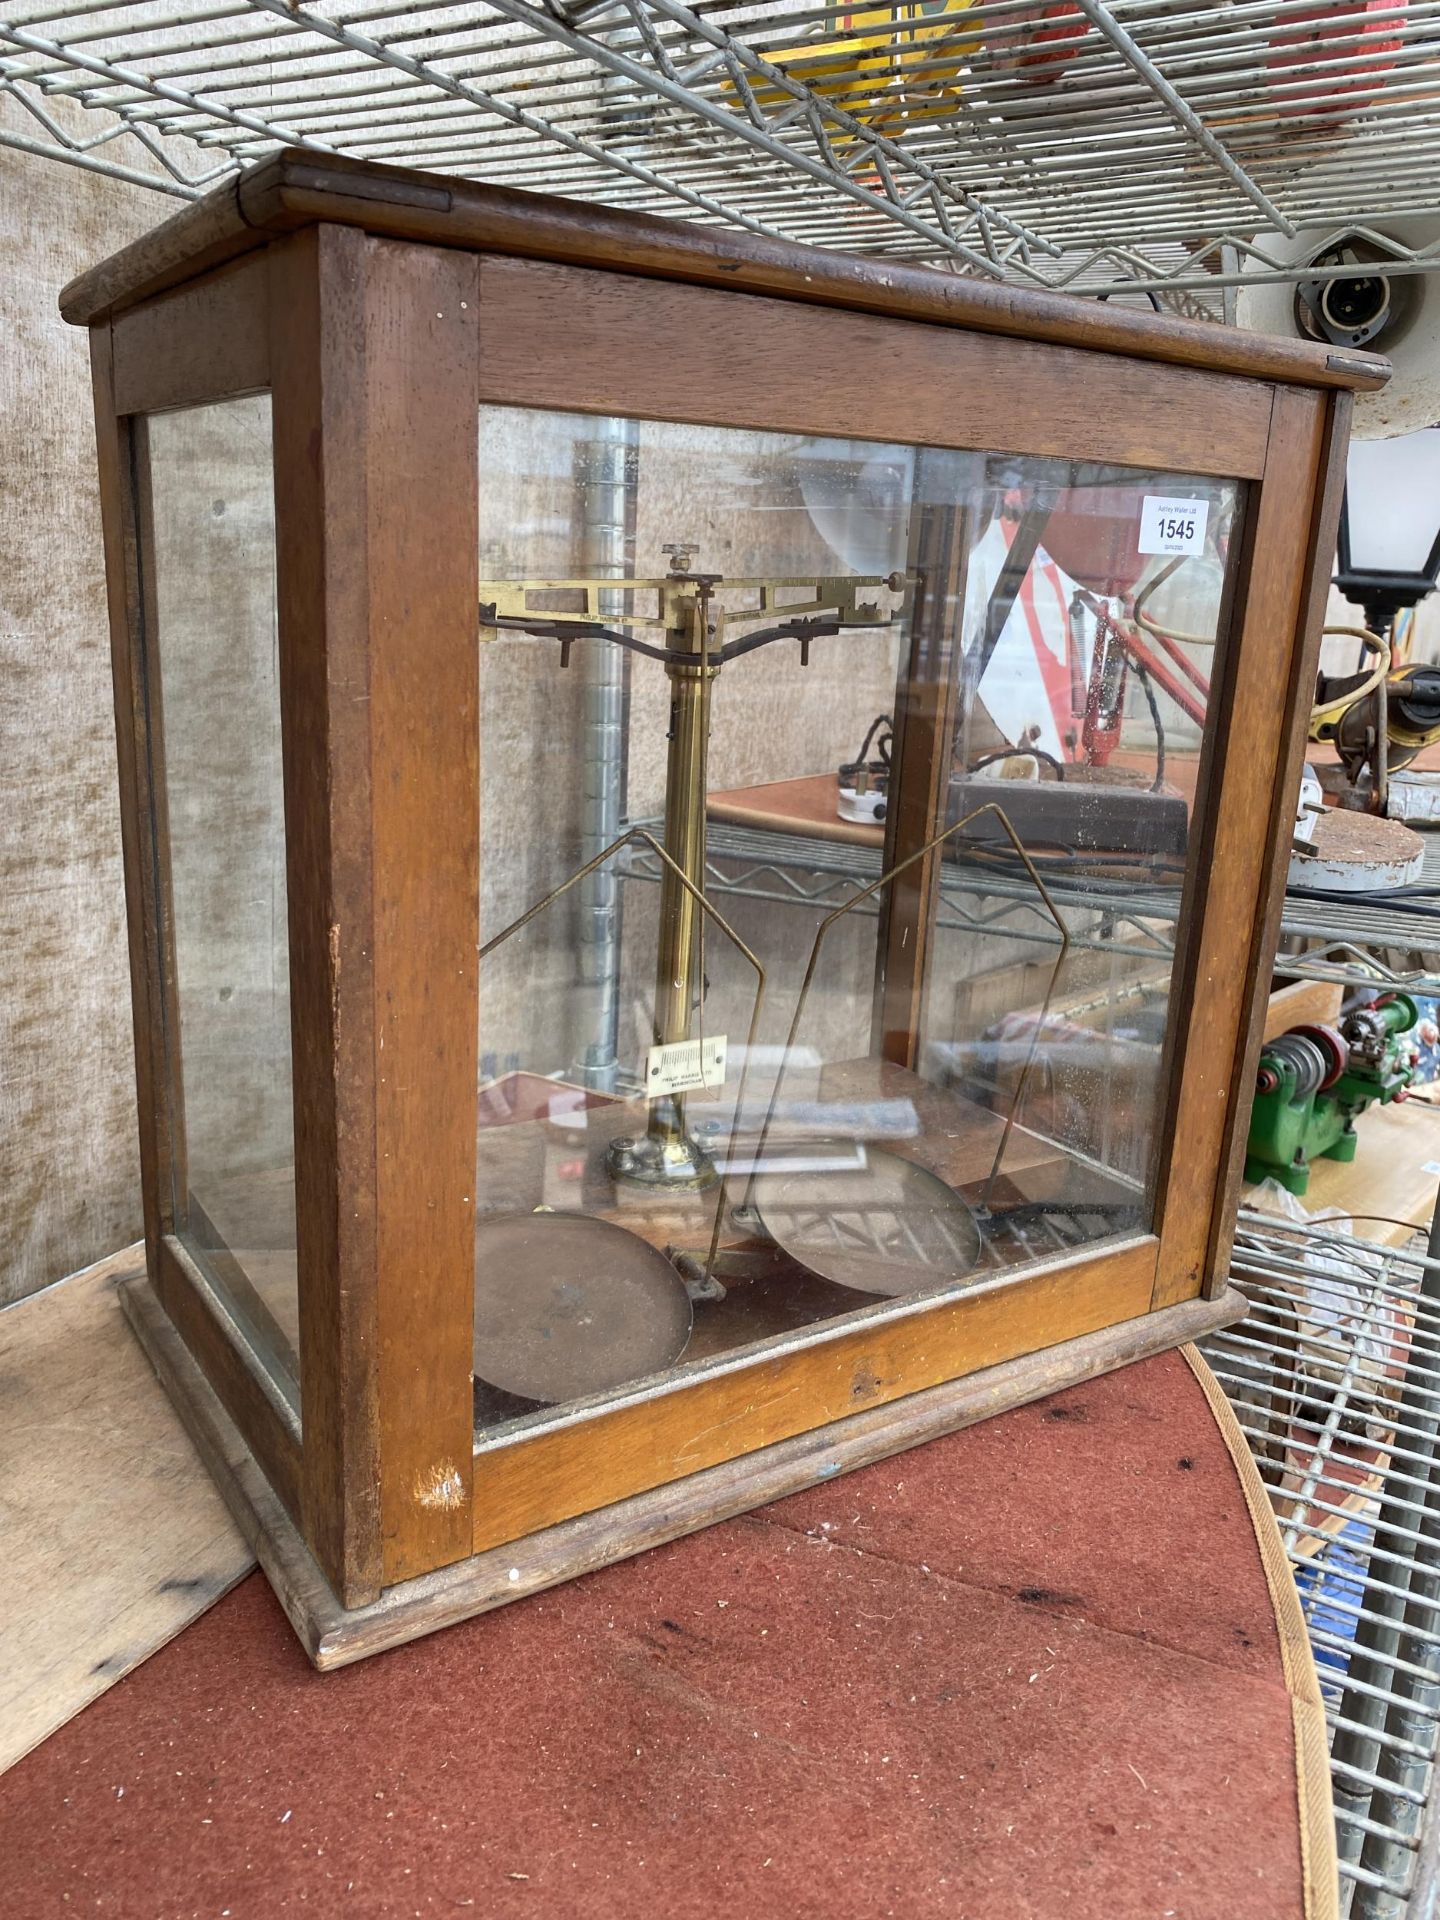 A SET OF VINTAGE 'PHILIP HARRIS LTD BIRMINGHAM' BALANCE SCALES IN A WOODEN AND GLASS DISPLAY CABINET